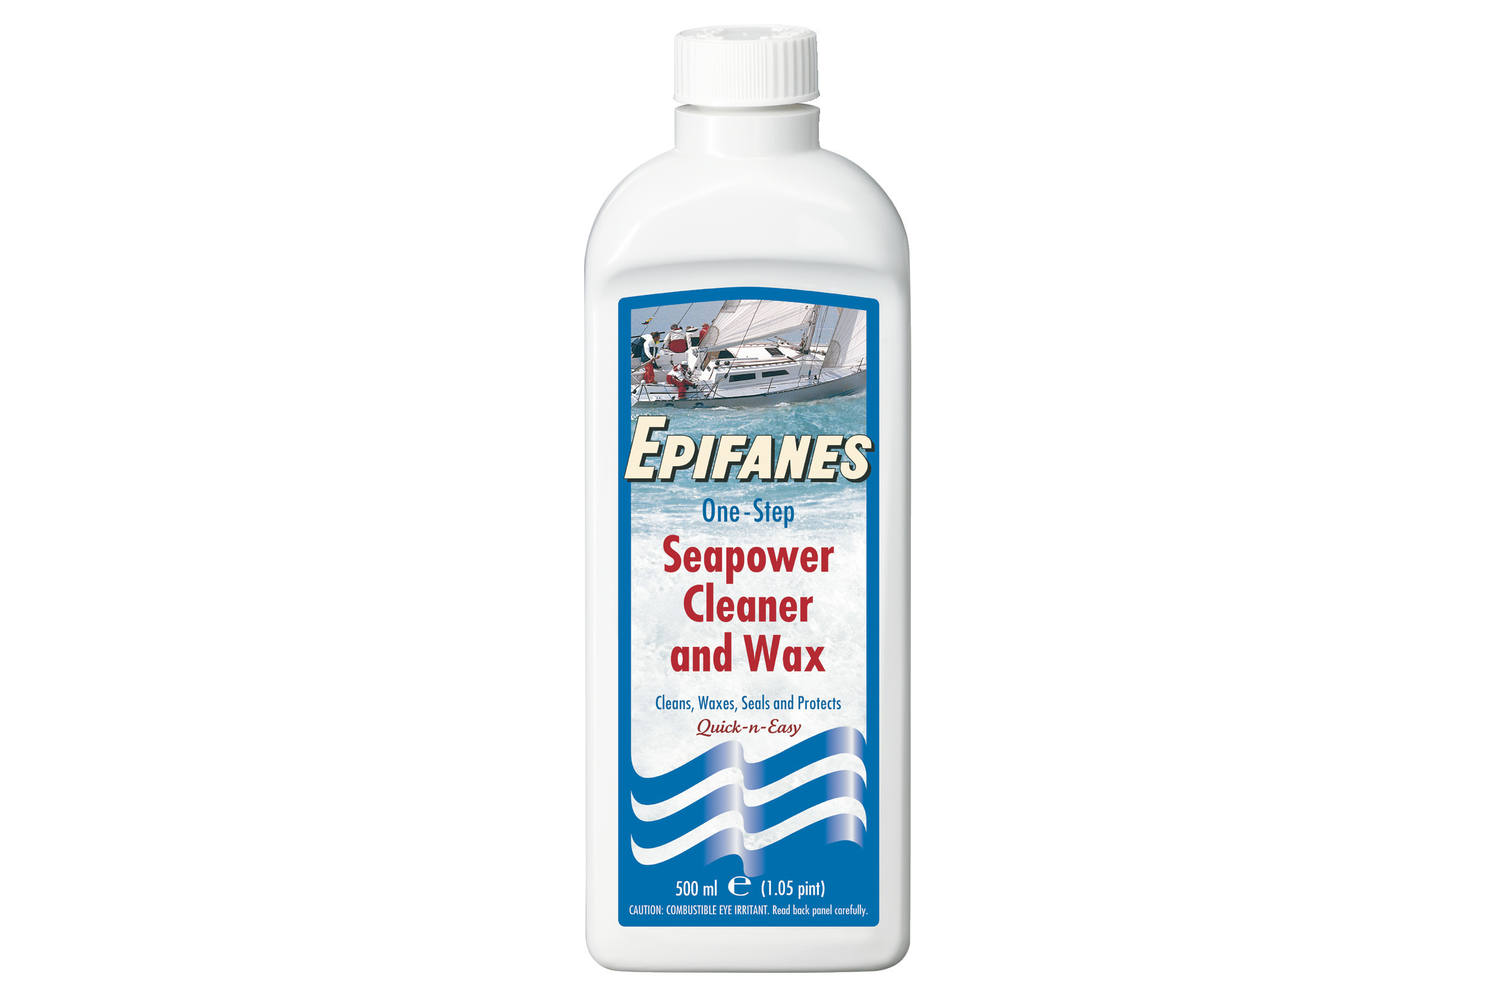 Epifanes Seapower Cleaner & Wax - 500ml